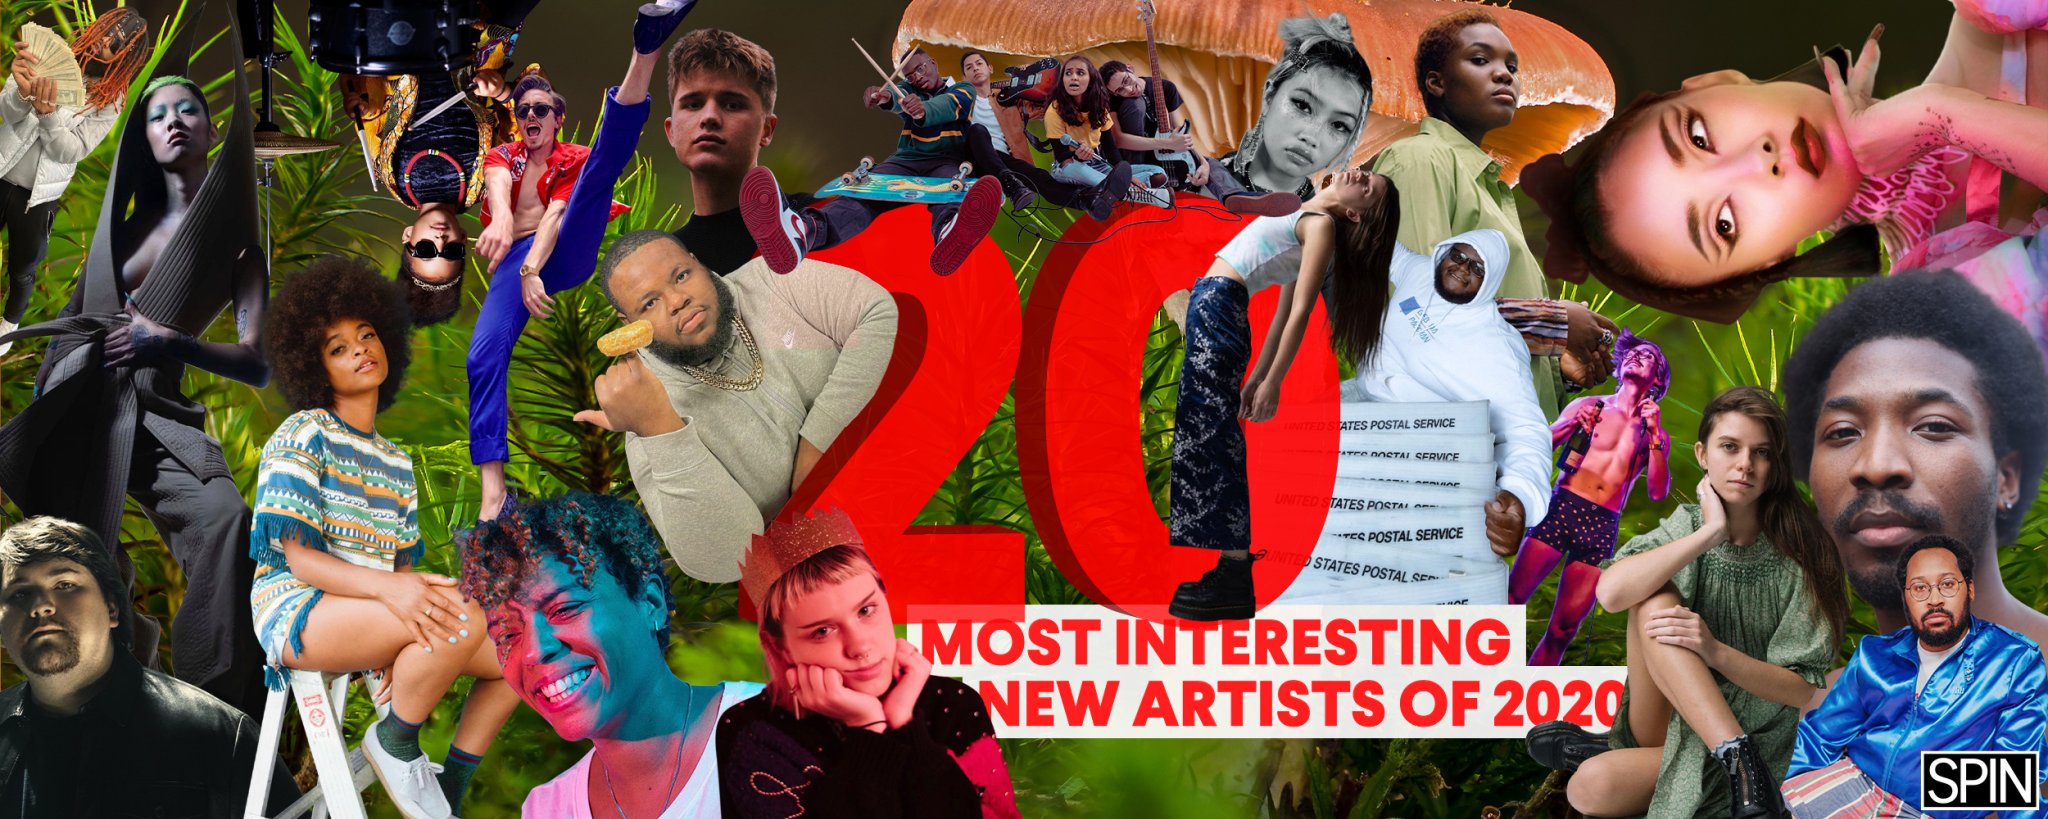 The 20 Most Interesting New Artists